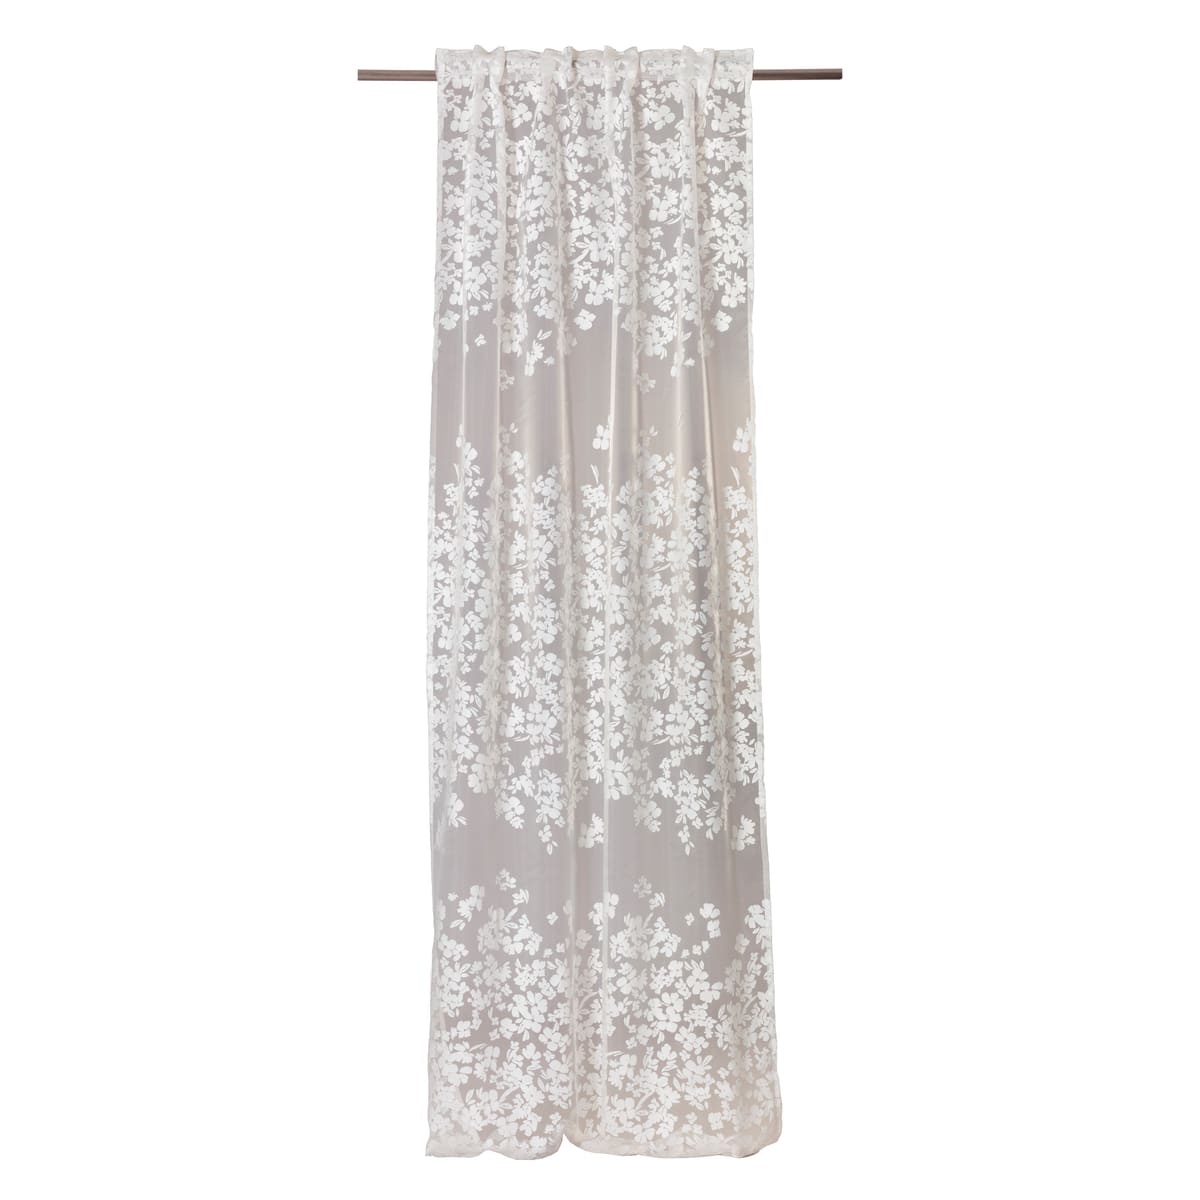 GLADIS WHITE FILTER CURTAIN 140X295CM WEBBING AND CONCEALED LOOP